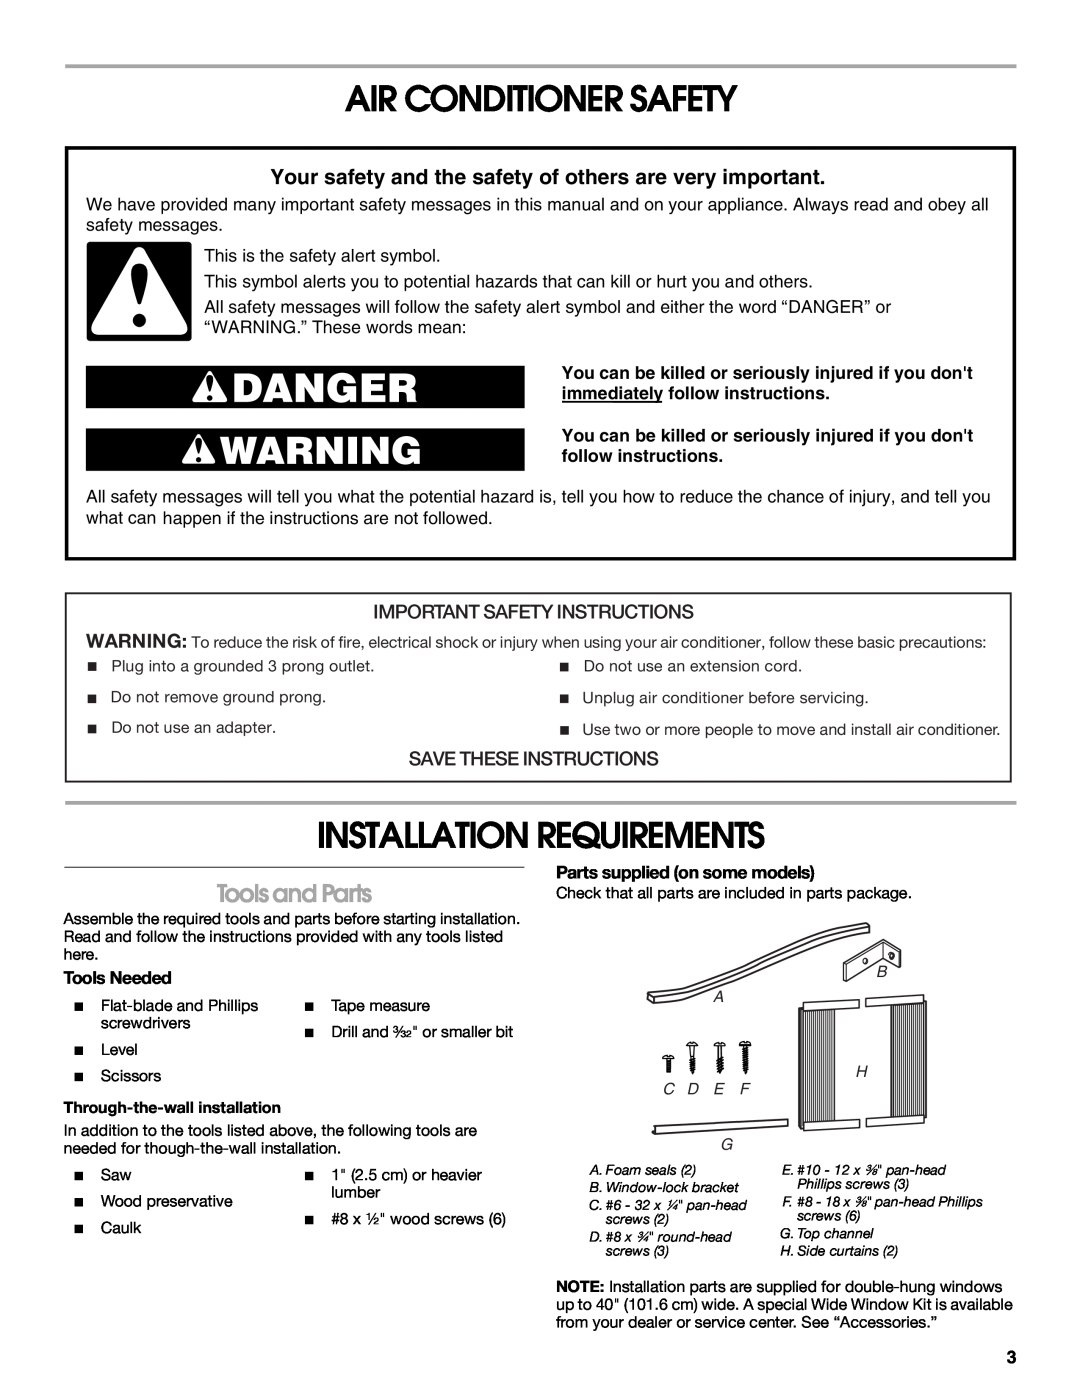 Whirlpool ACE082XP1 Air Conditioner Safety, Installation Requirements, Tools and Parts, Important Safety Instructions 